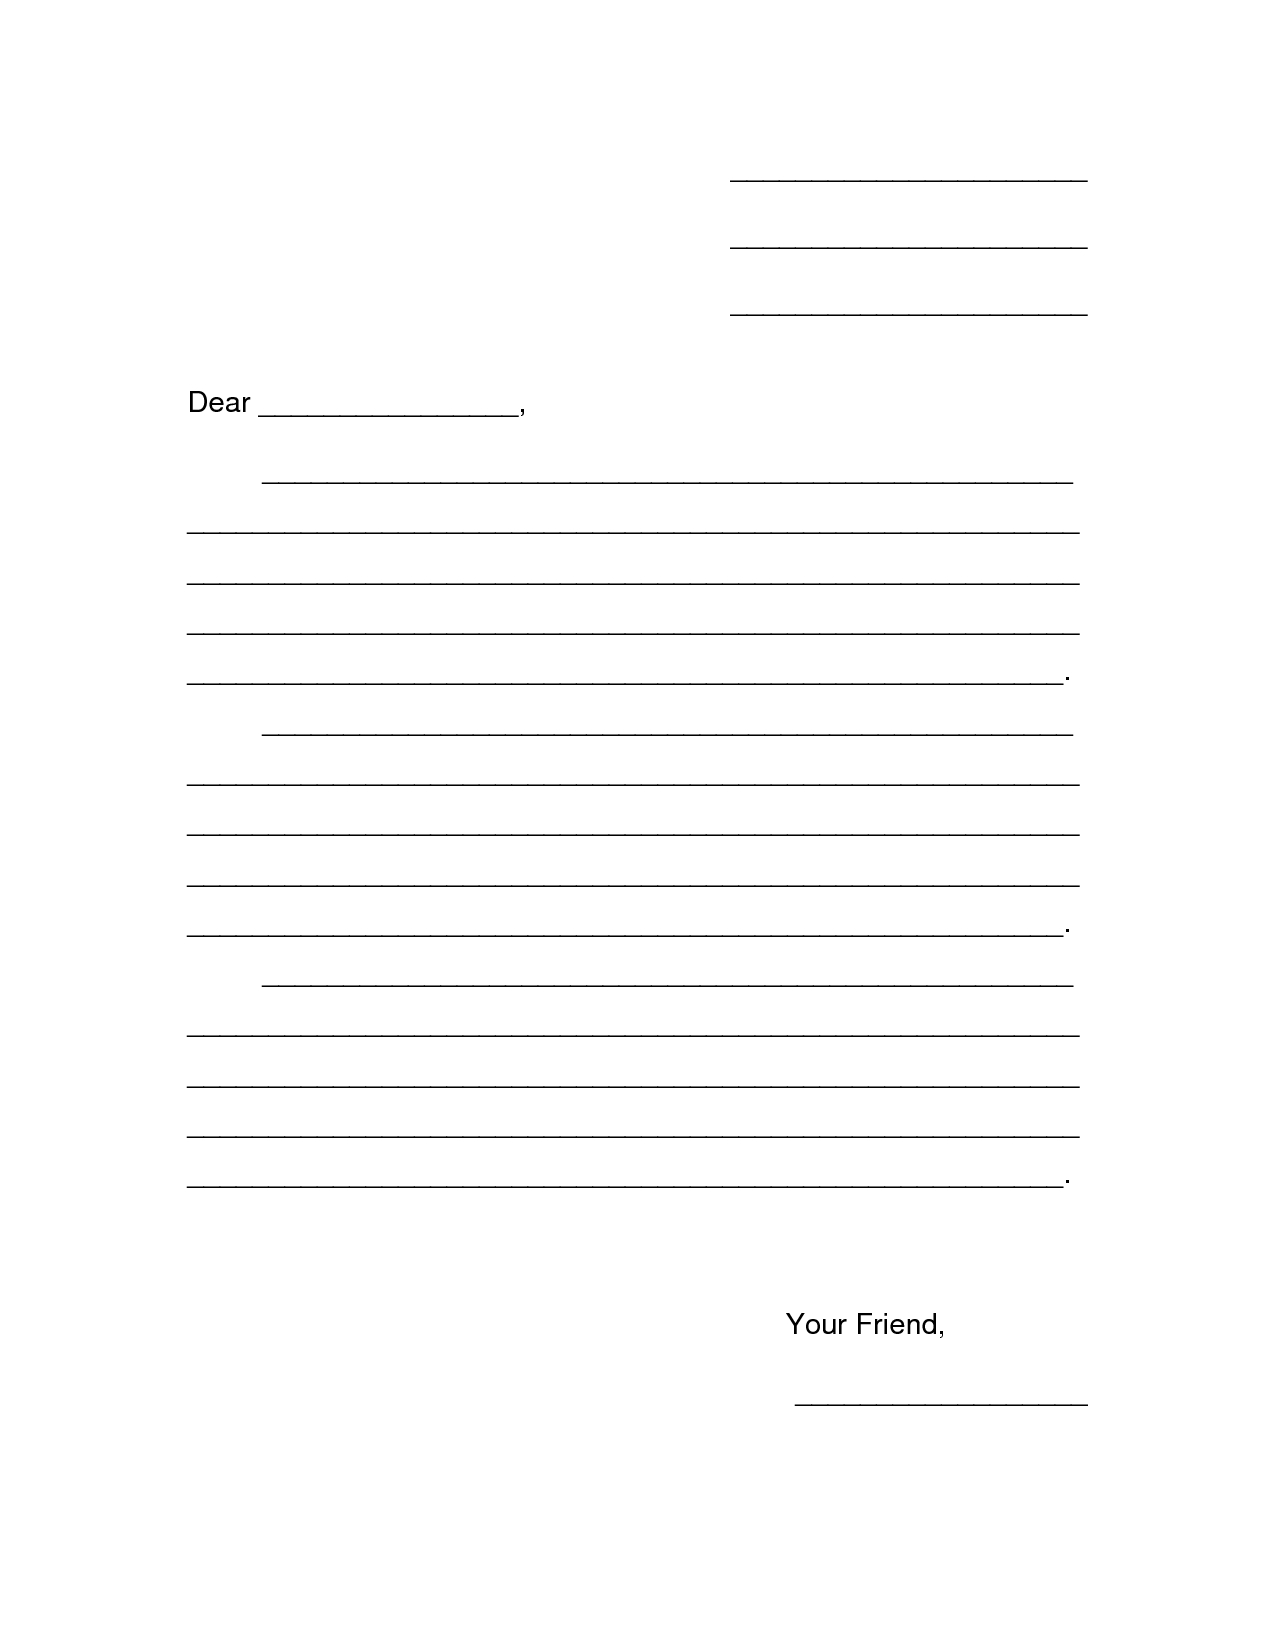 Friendly Letter Template Pdf ] - Free Friendly Letter Pertaining To Blank Letter Writing Template For Kids